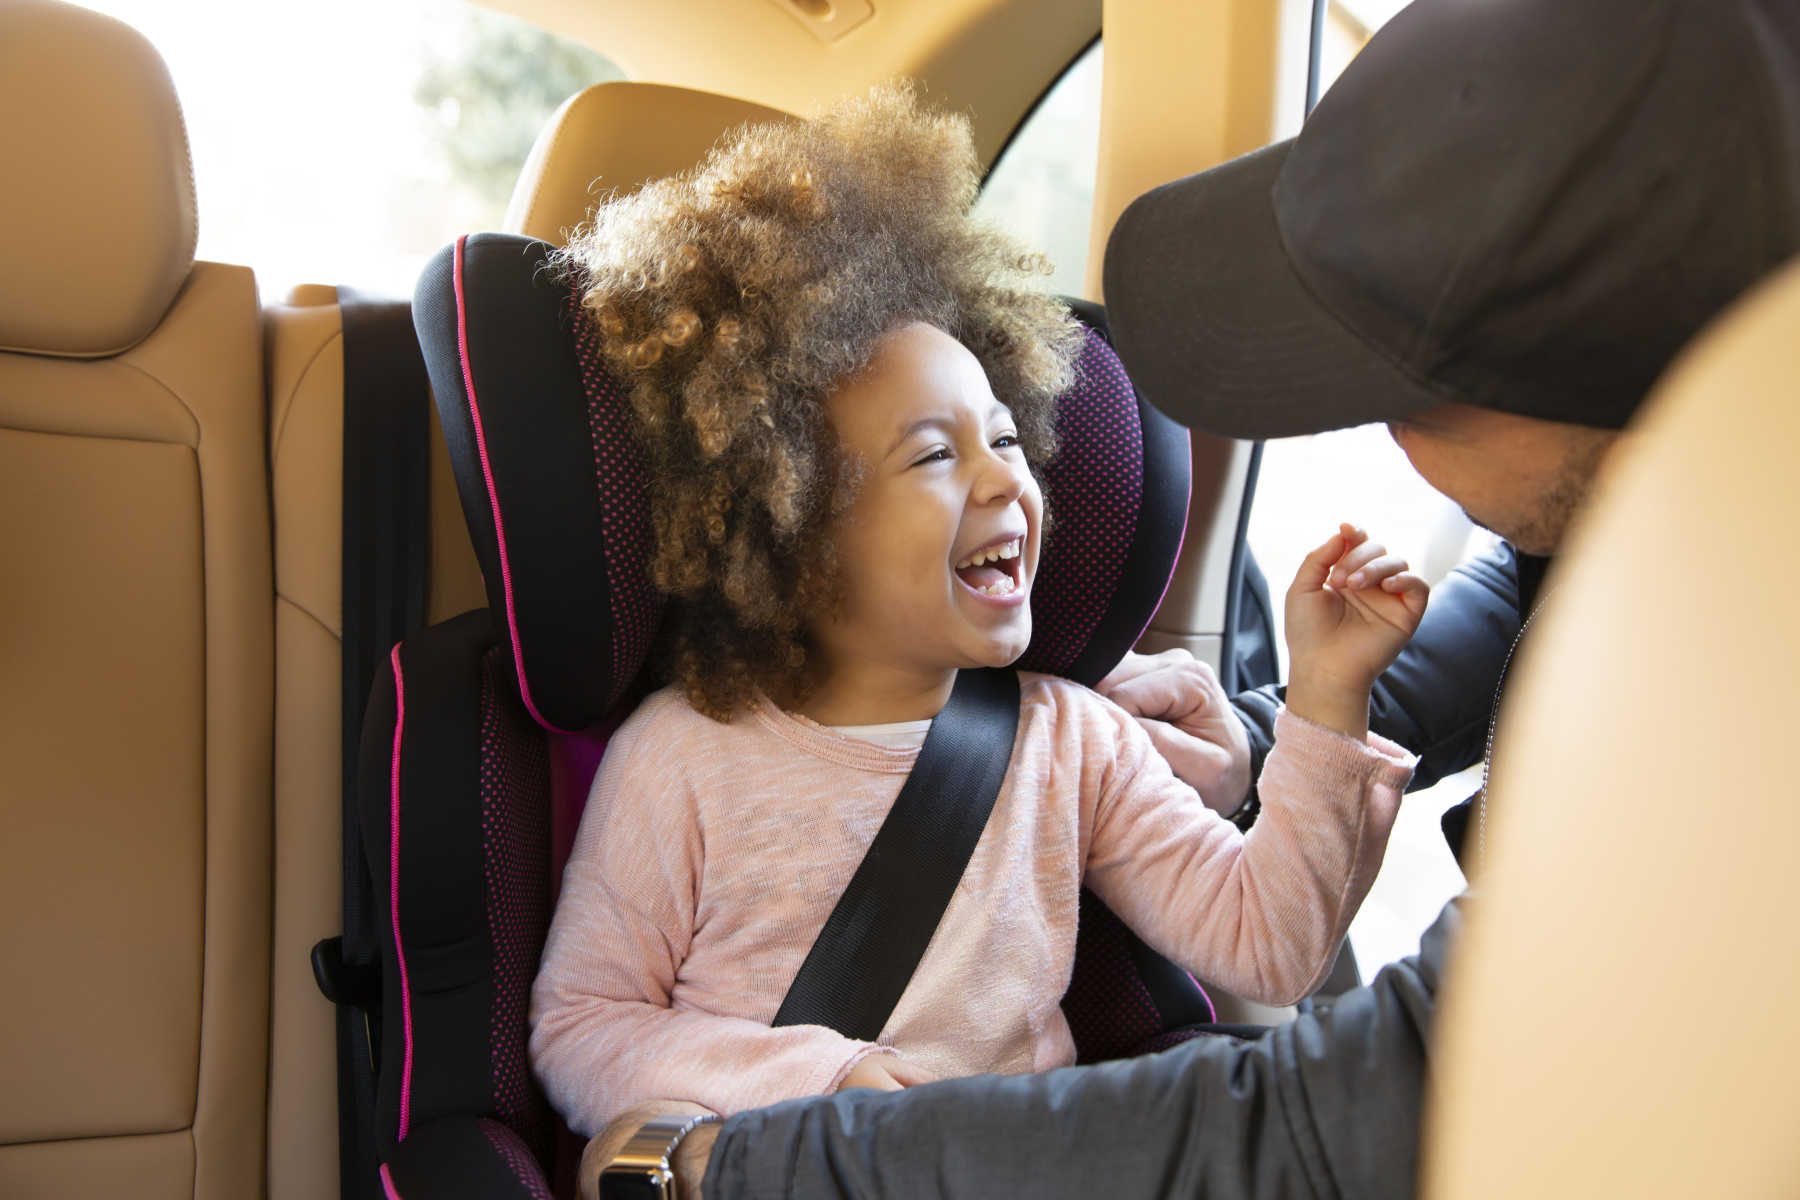 The Best Car Seats For 4 Year Olds, Best Car Seats For 4 To 12 Year Olds